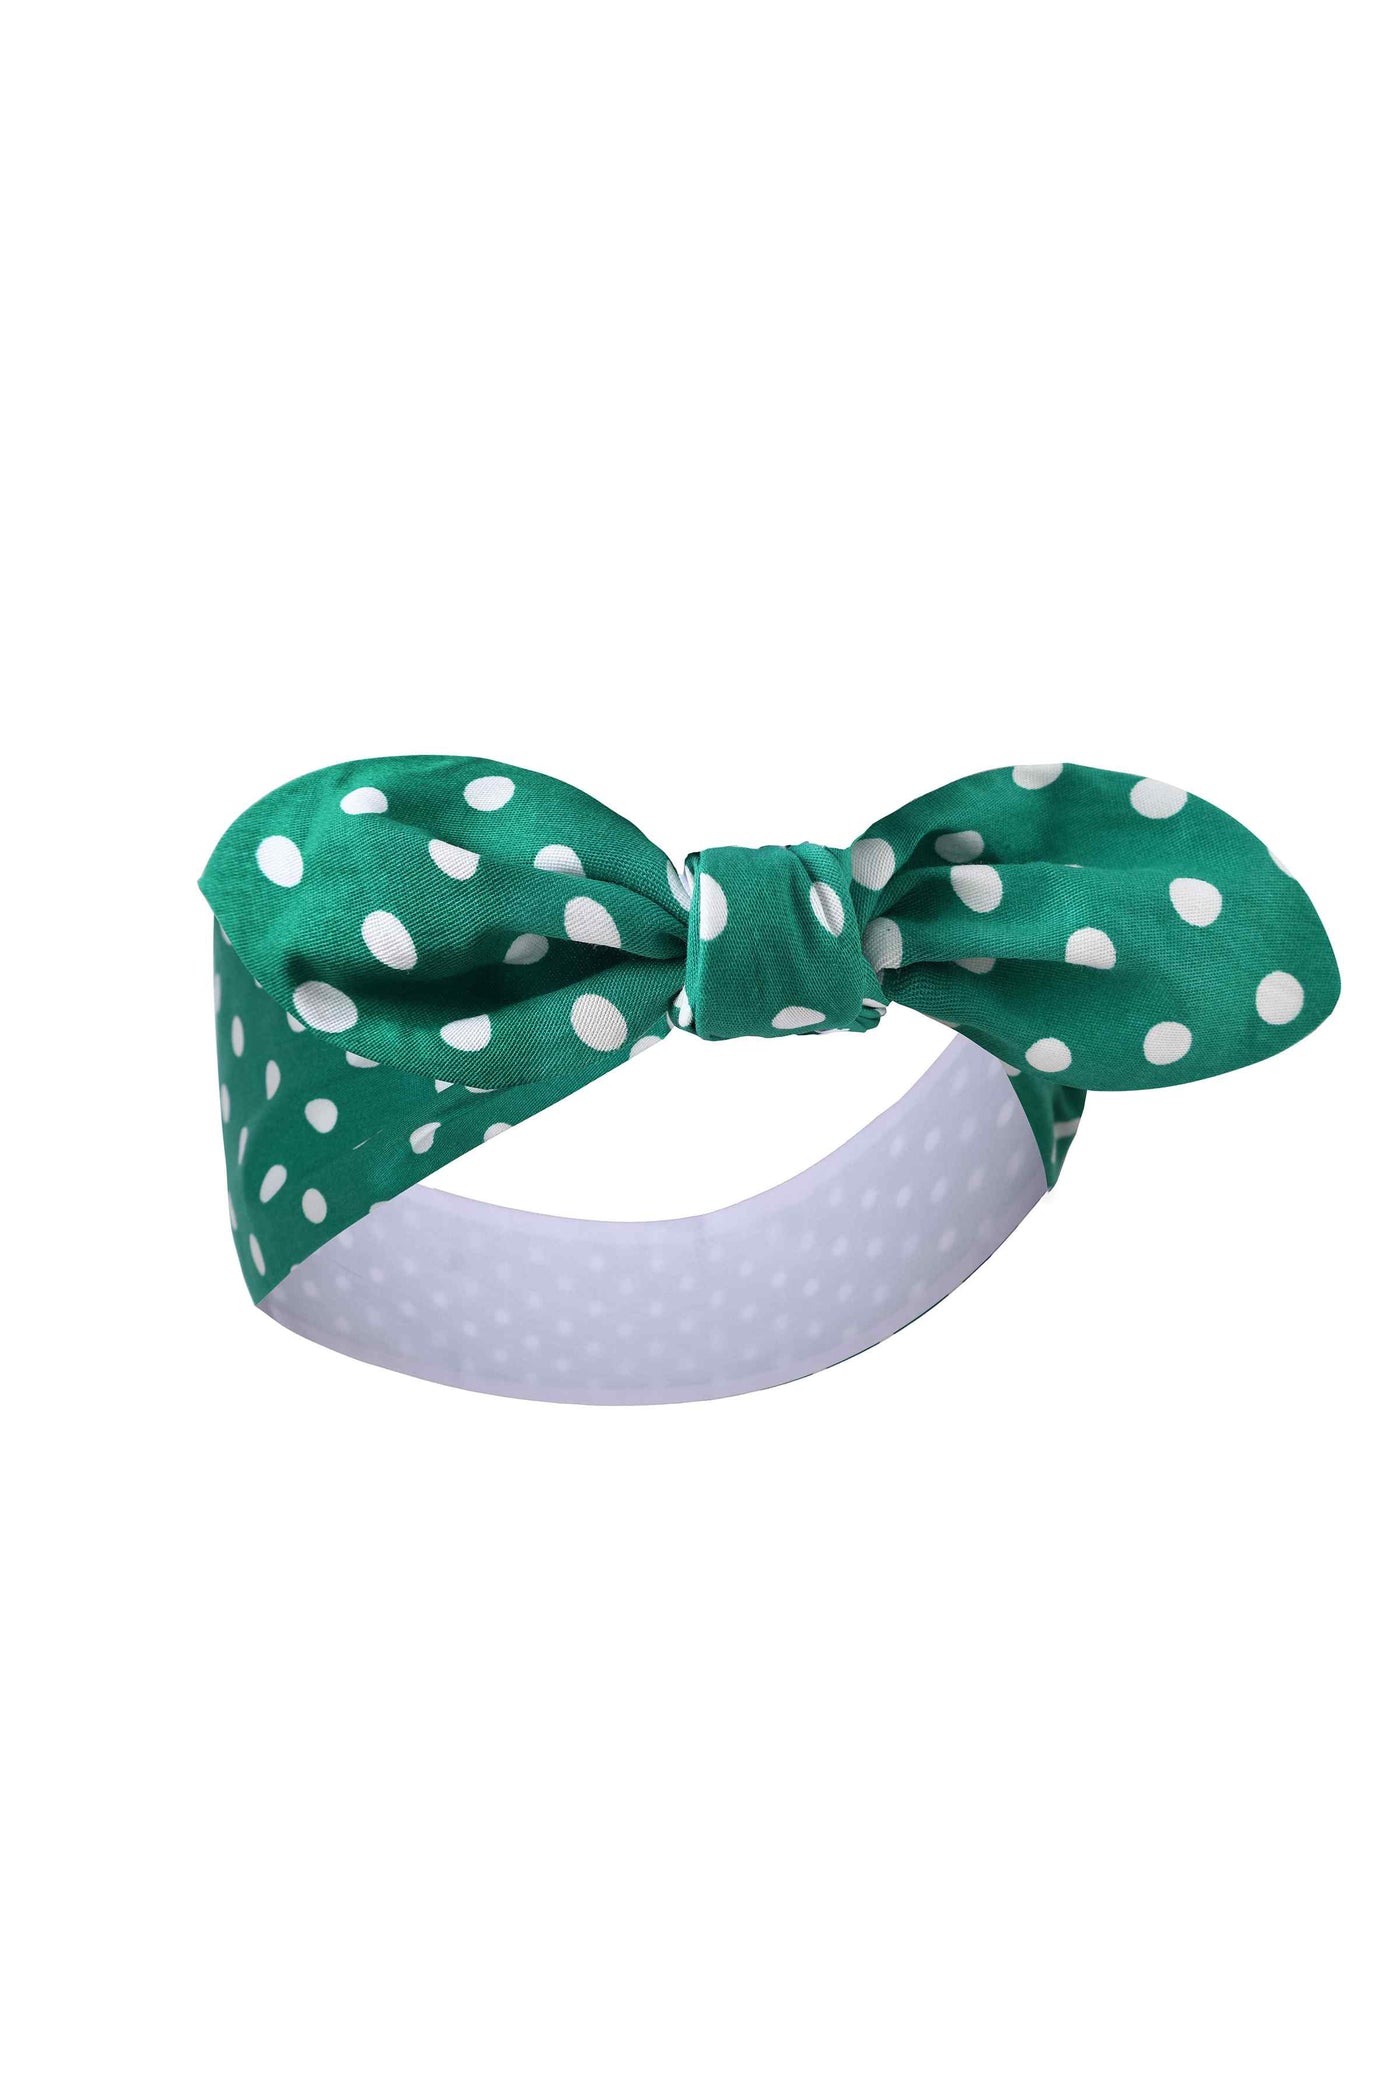 Front View of Tie Knot Green Polka Dot Reversible Headband